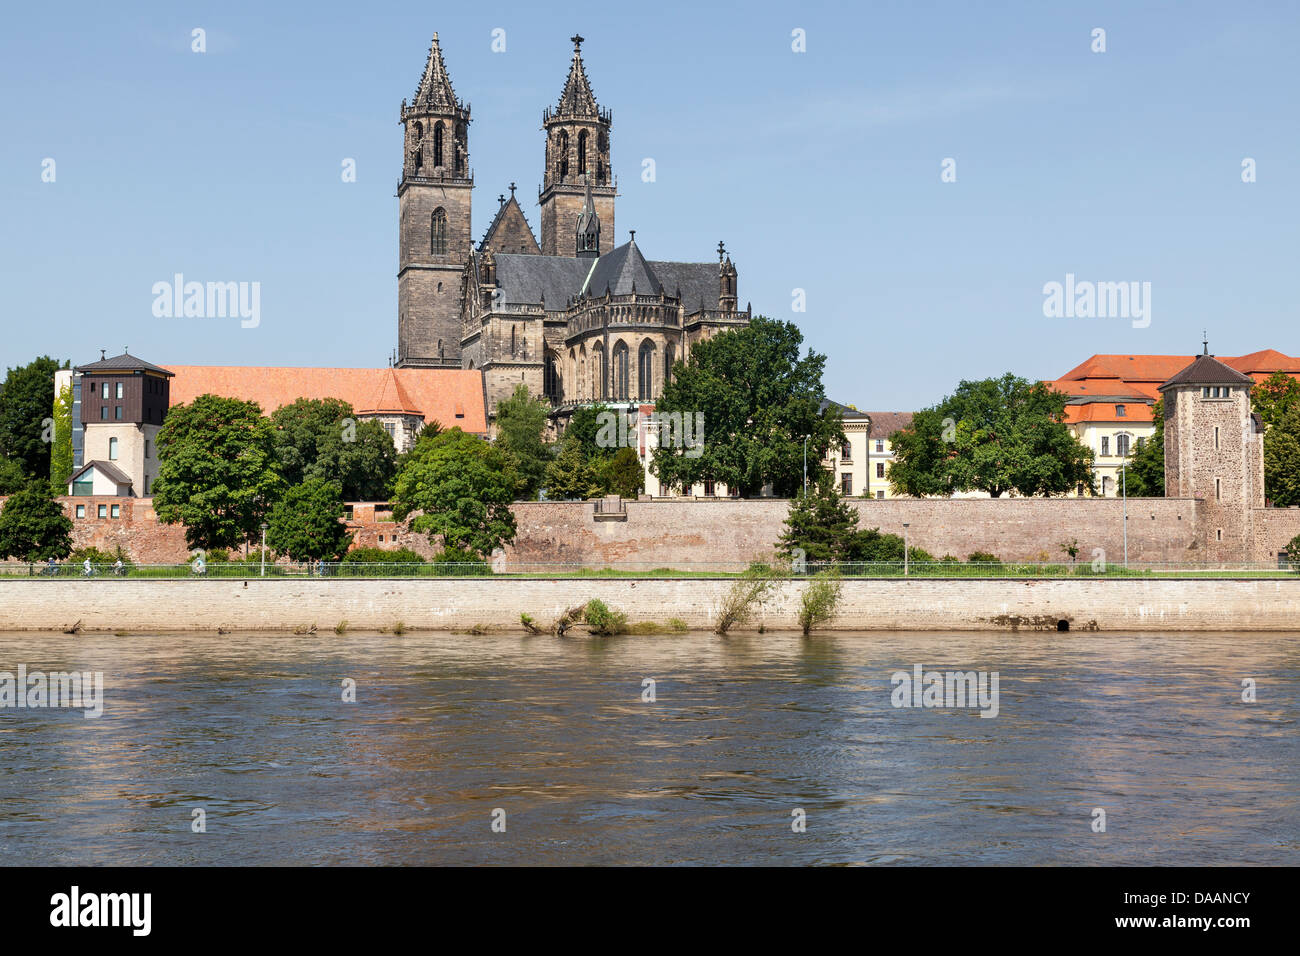 River Elbe with the Cathedral and Fürstenwall, Magdeburg, Saxony Anhalt, Germany Stock Photo